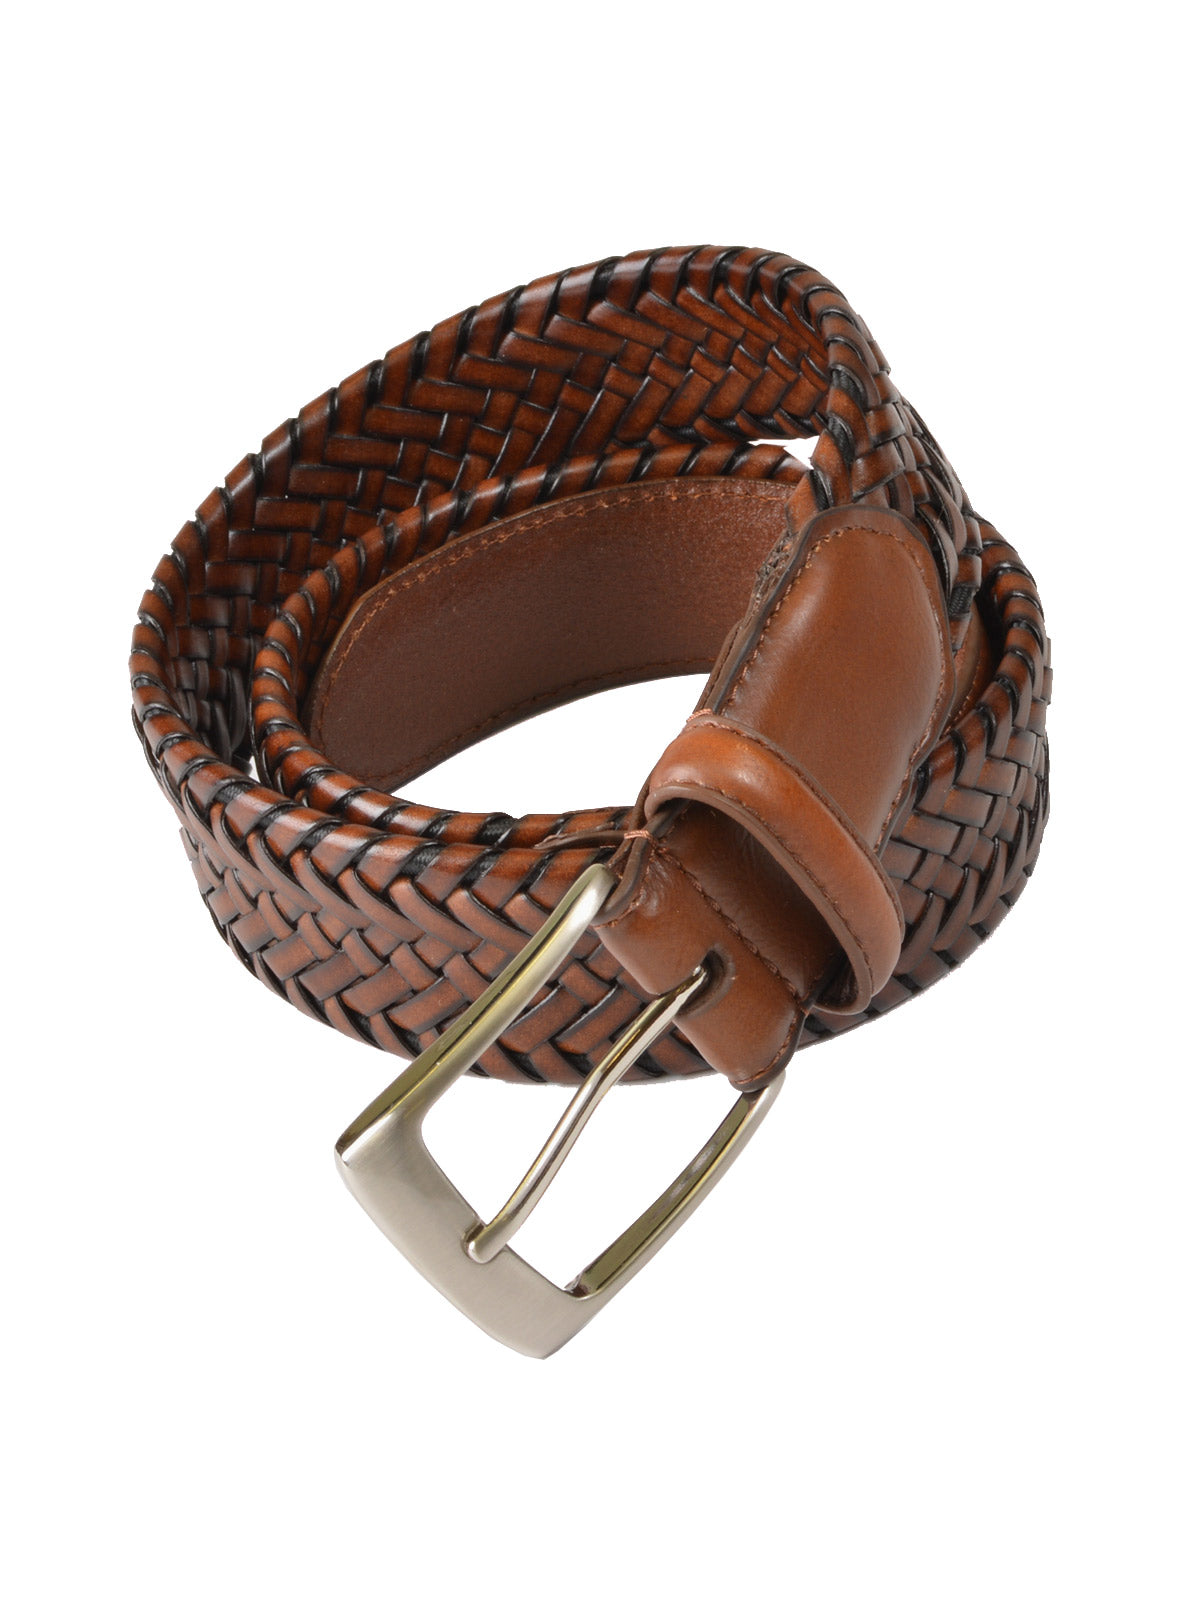 Outfitter Genuine Leather Braided Stretch Belts in Tan - Big Man Sizes